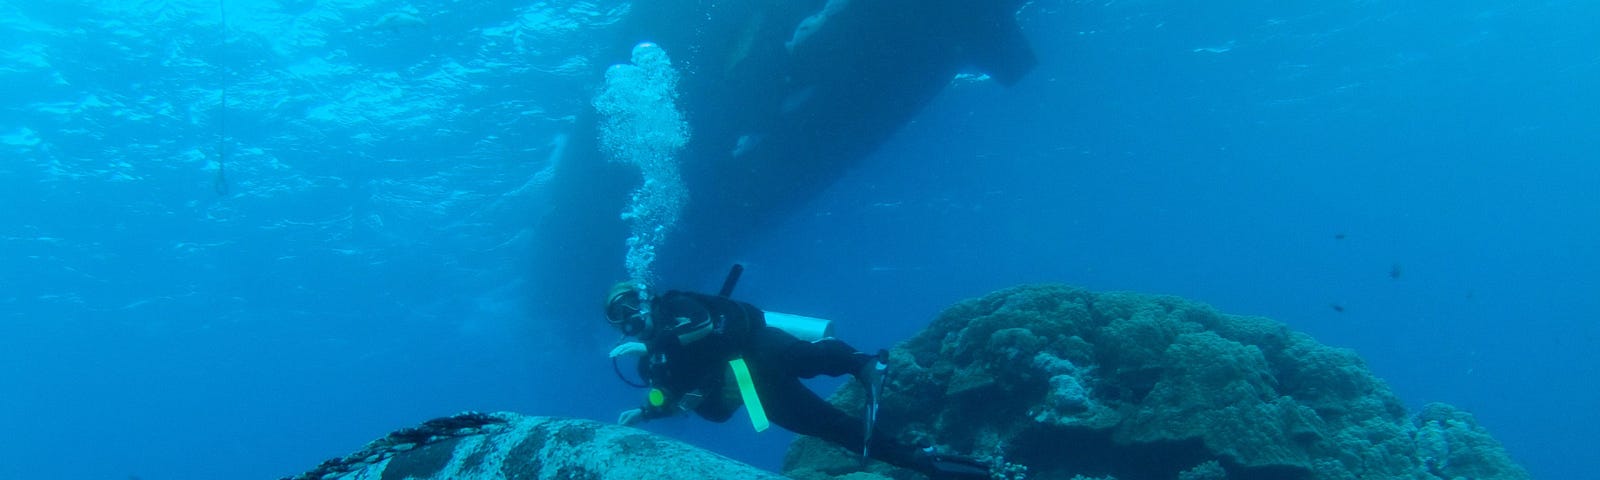 Scuba diving with Potato Cod. Great Barrier Reef